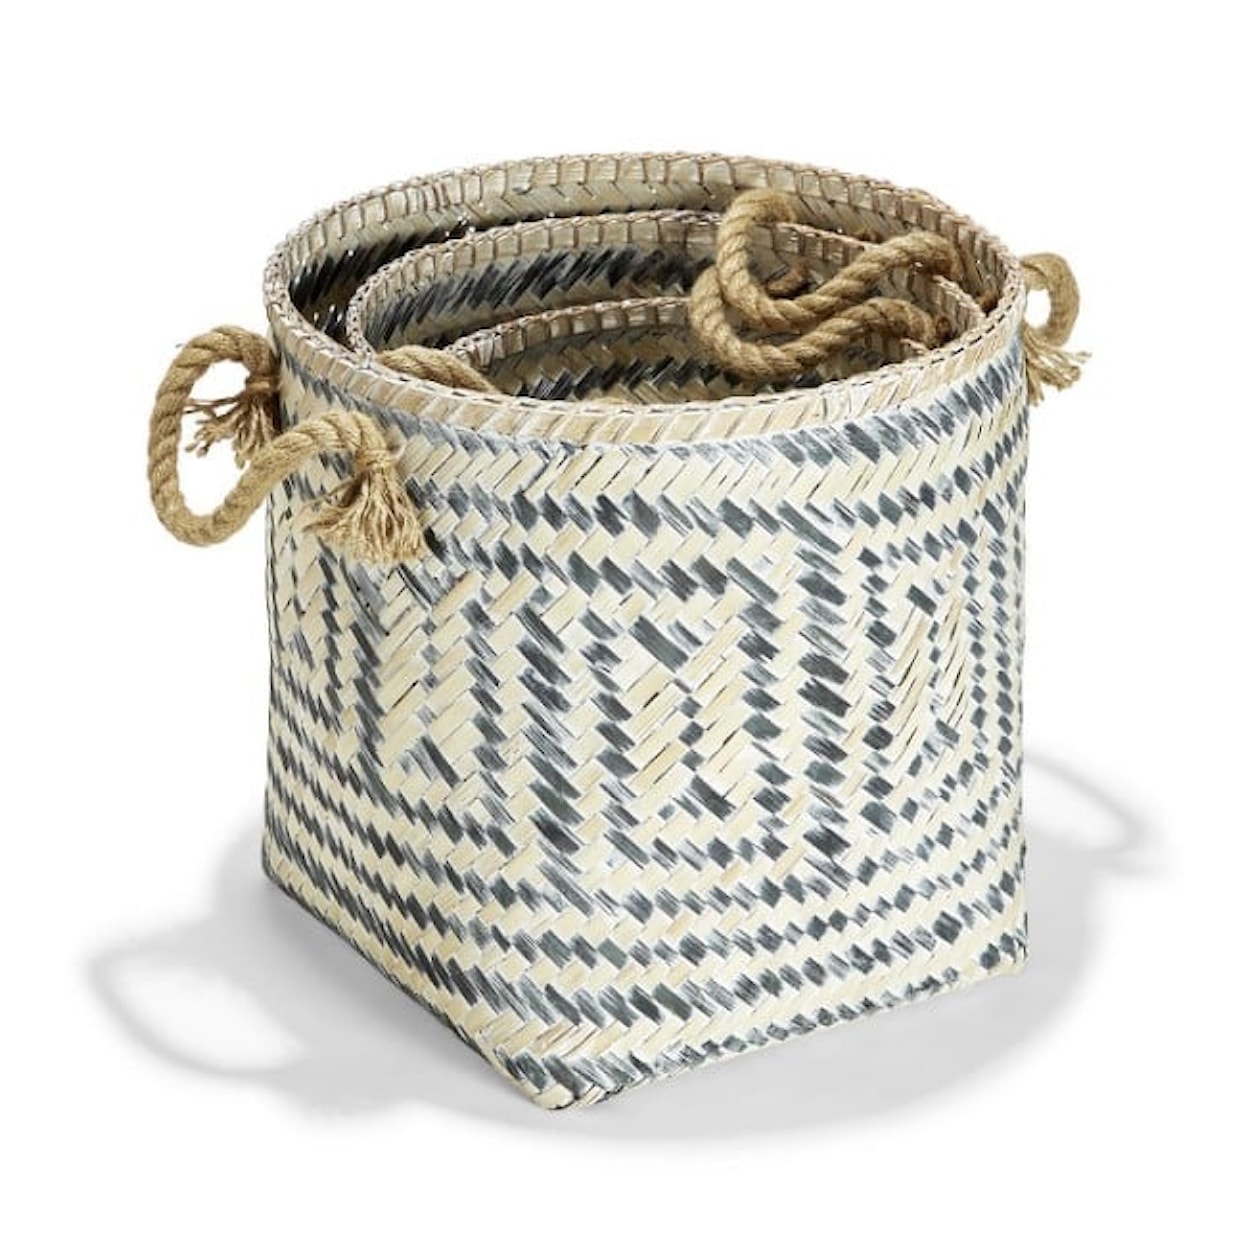 Two's Company Waters Edge PERIVILOS HAND-CRAFTED BASKET MEDIUM